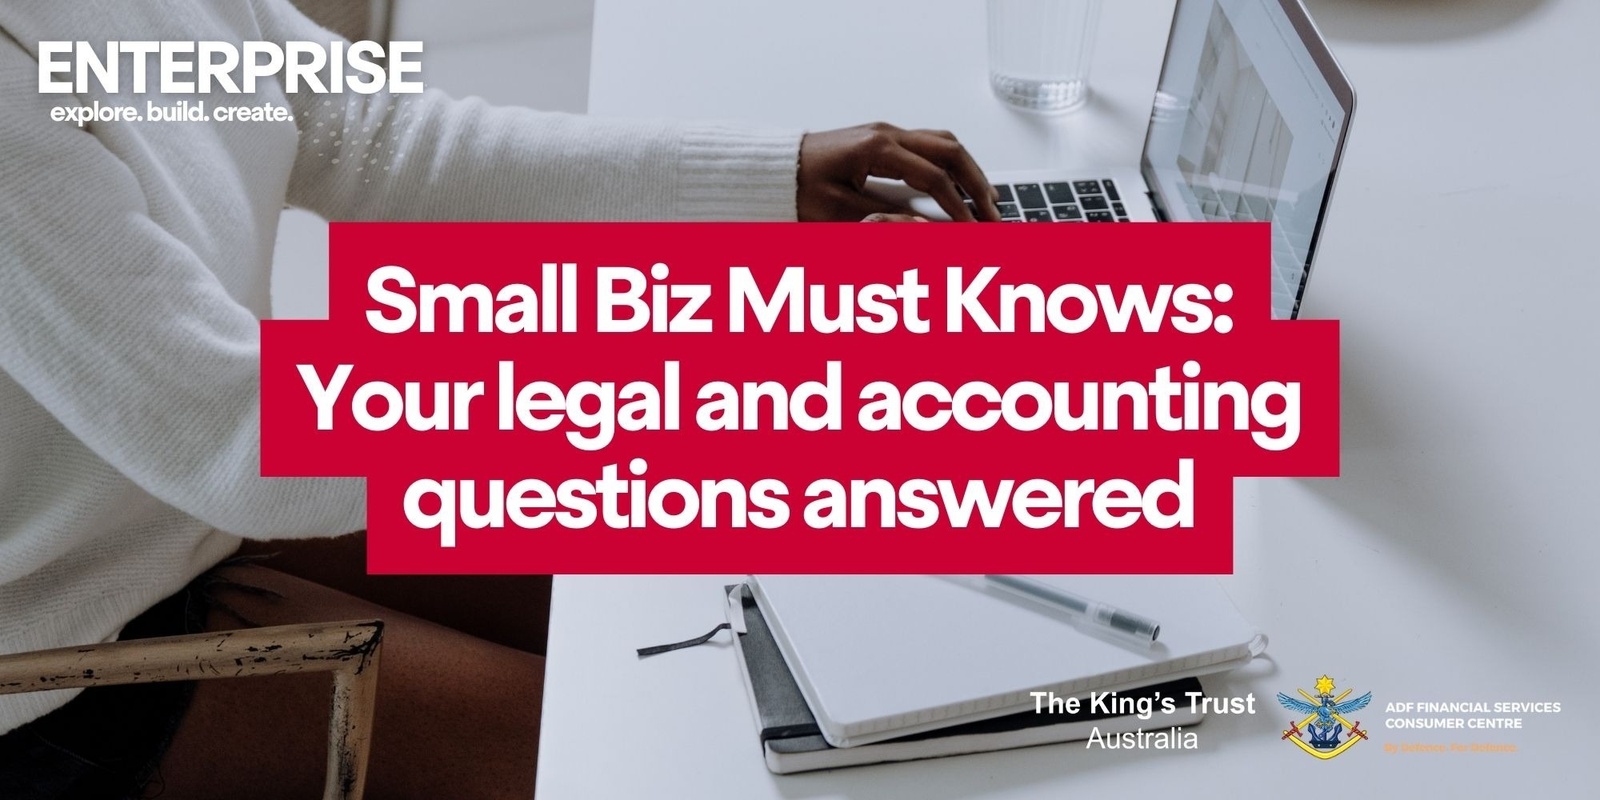 Banner image for Small Biz Must Knows: Your legal and accounting questions answered.